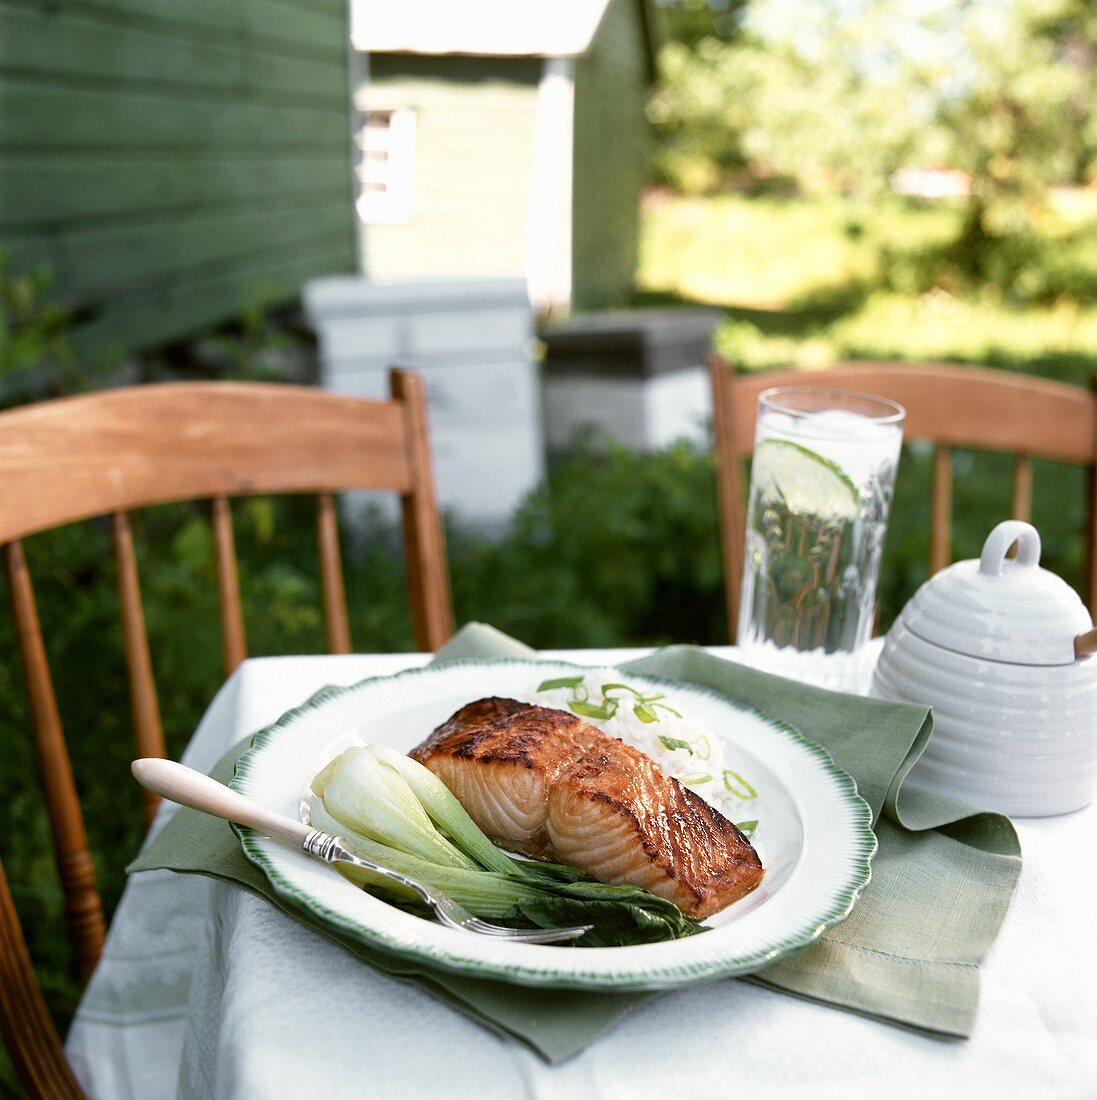 Salmon fillet with honey, pak choi & rice on outdoor table